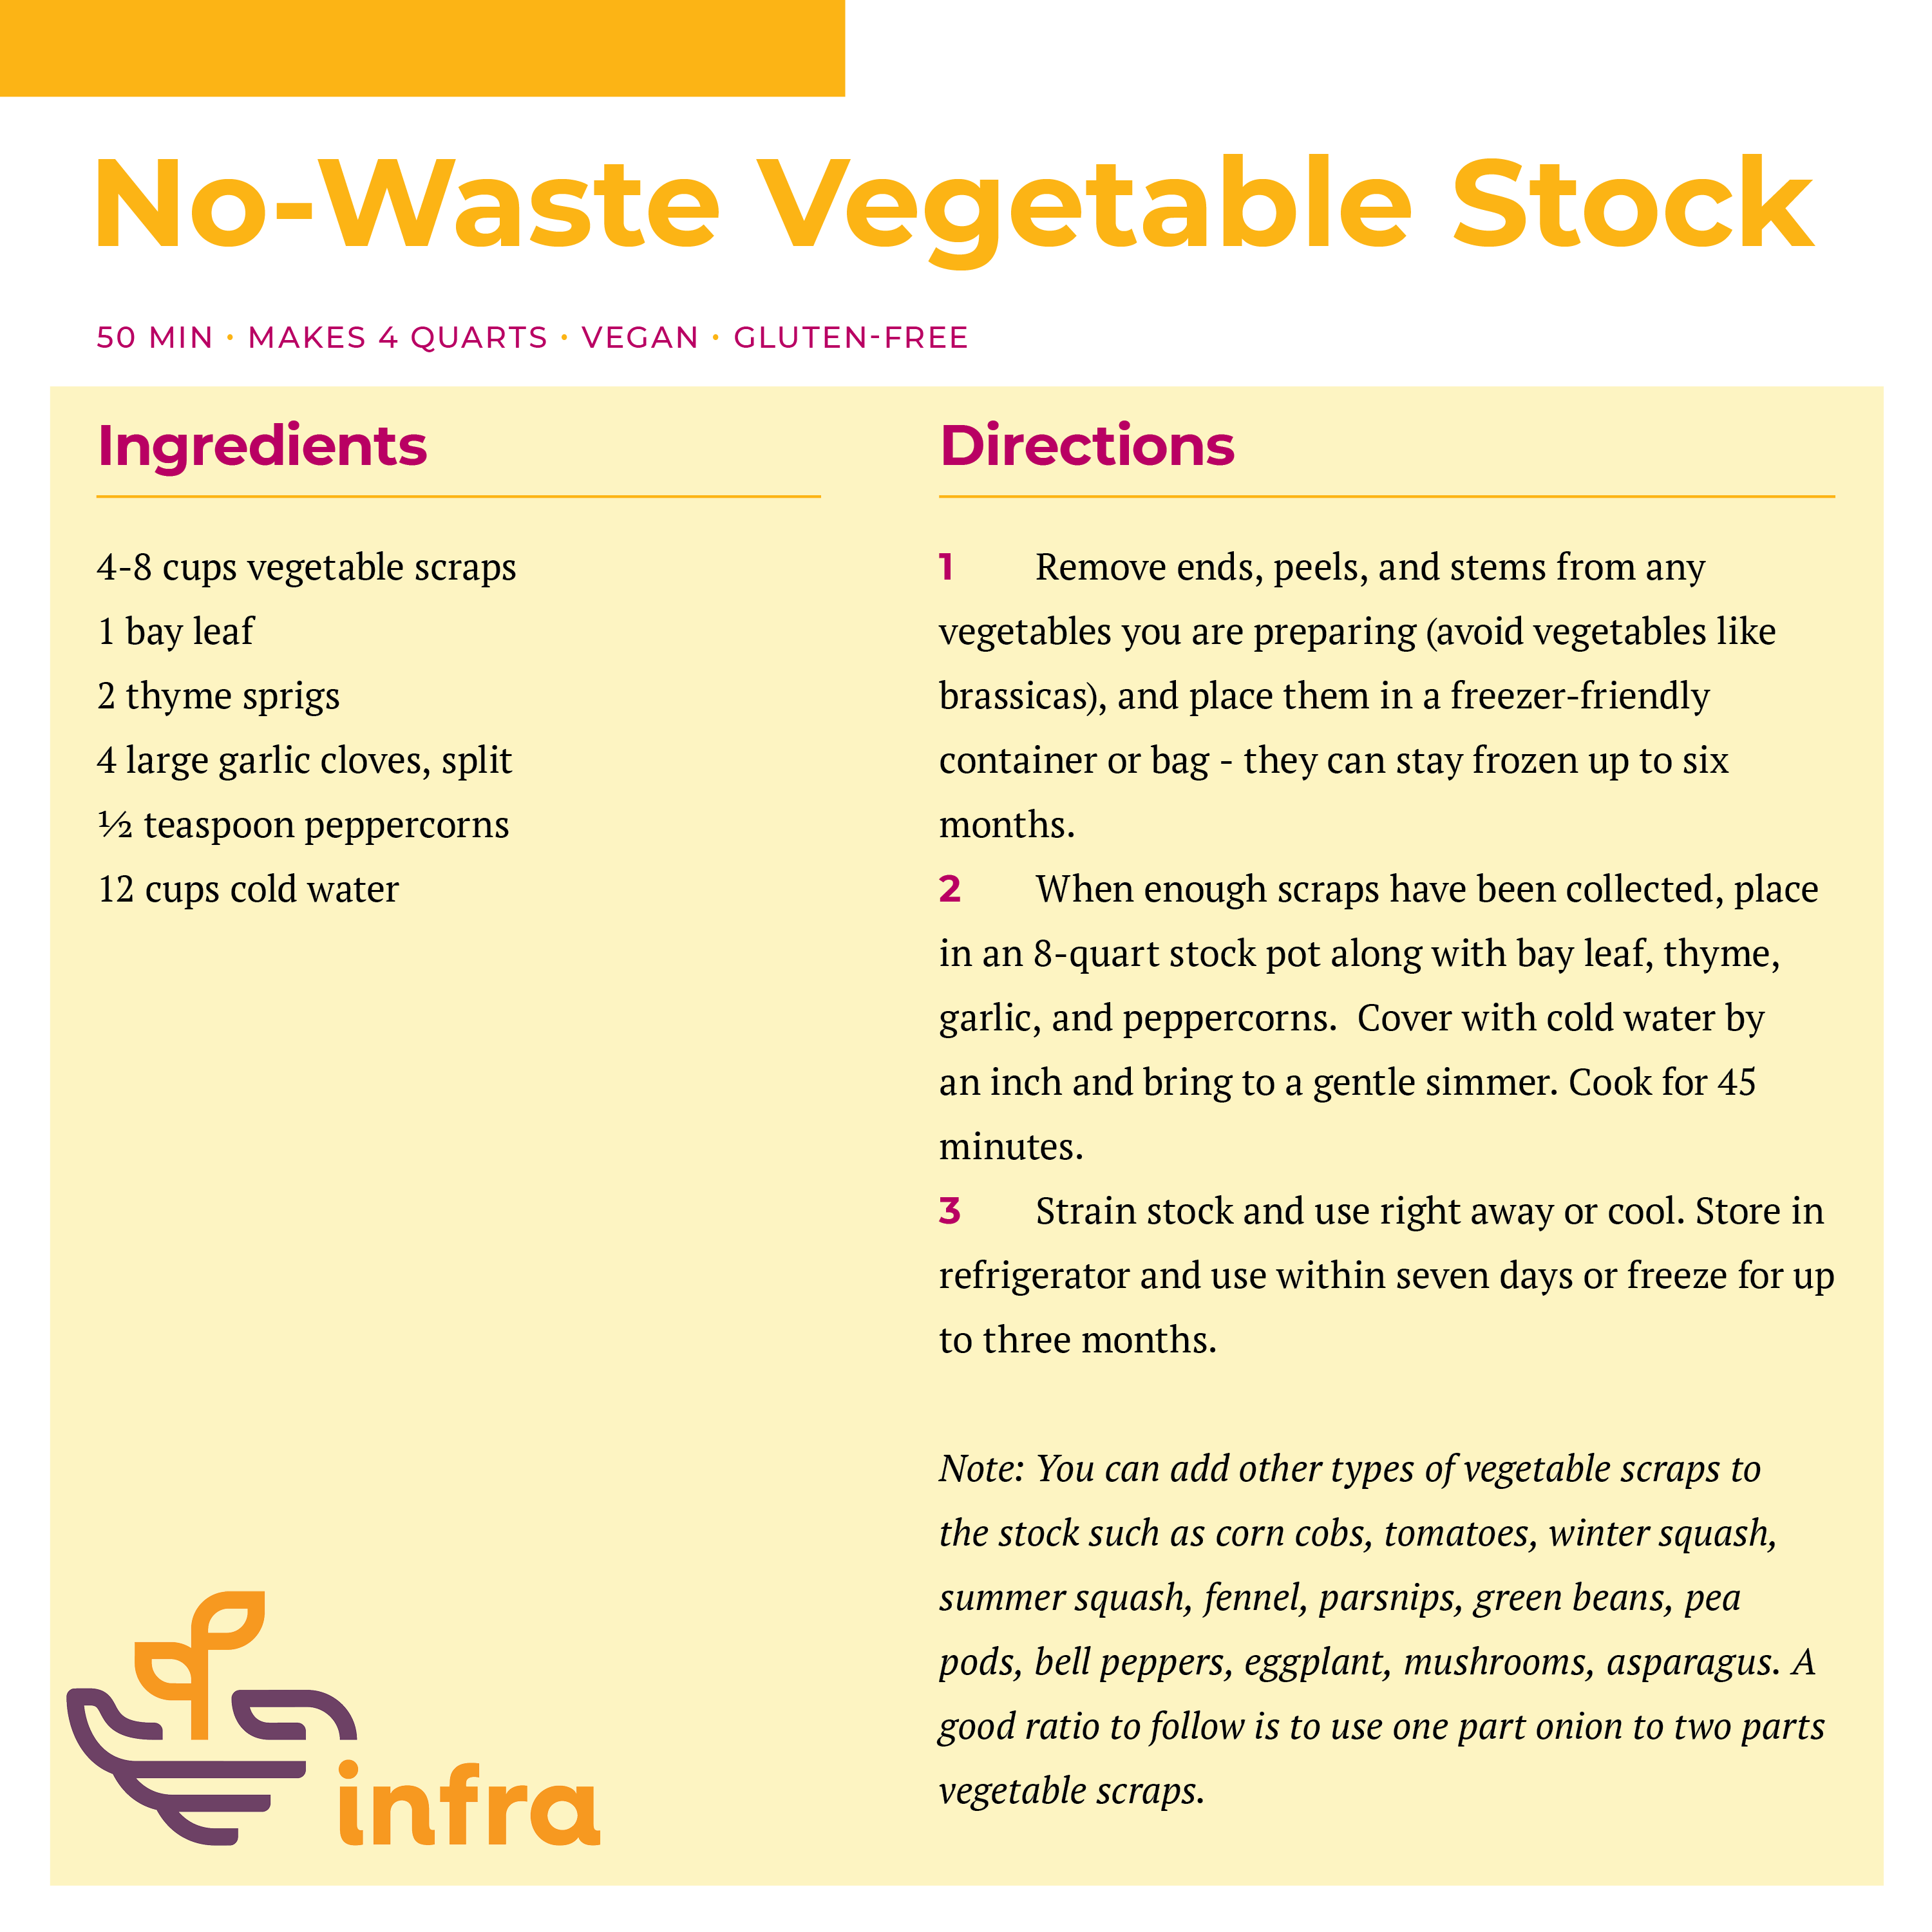 No-Waste Vegetable Stock